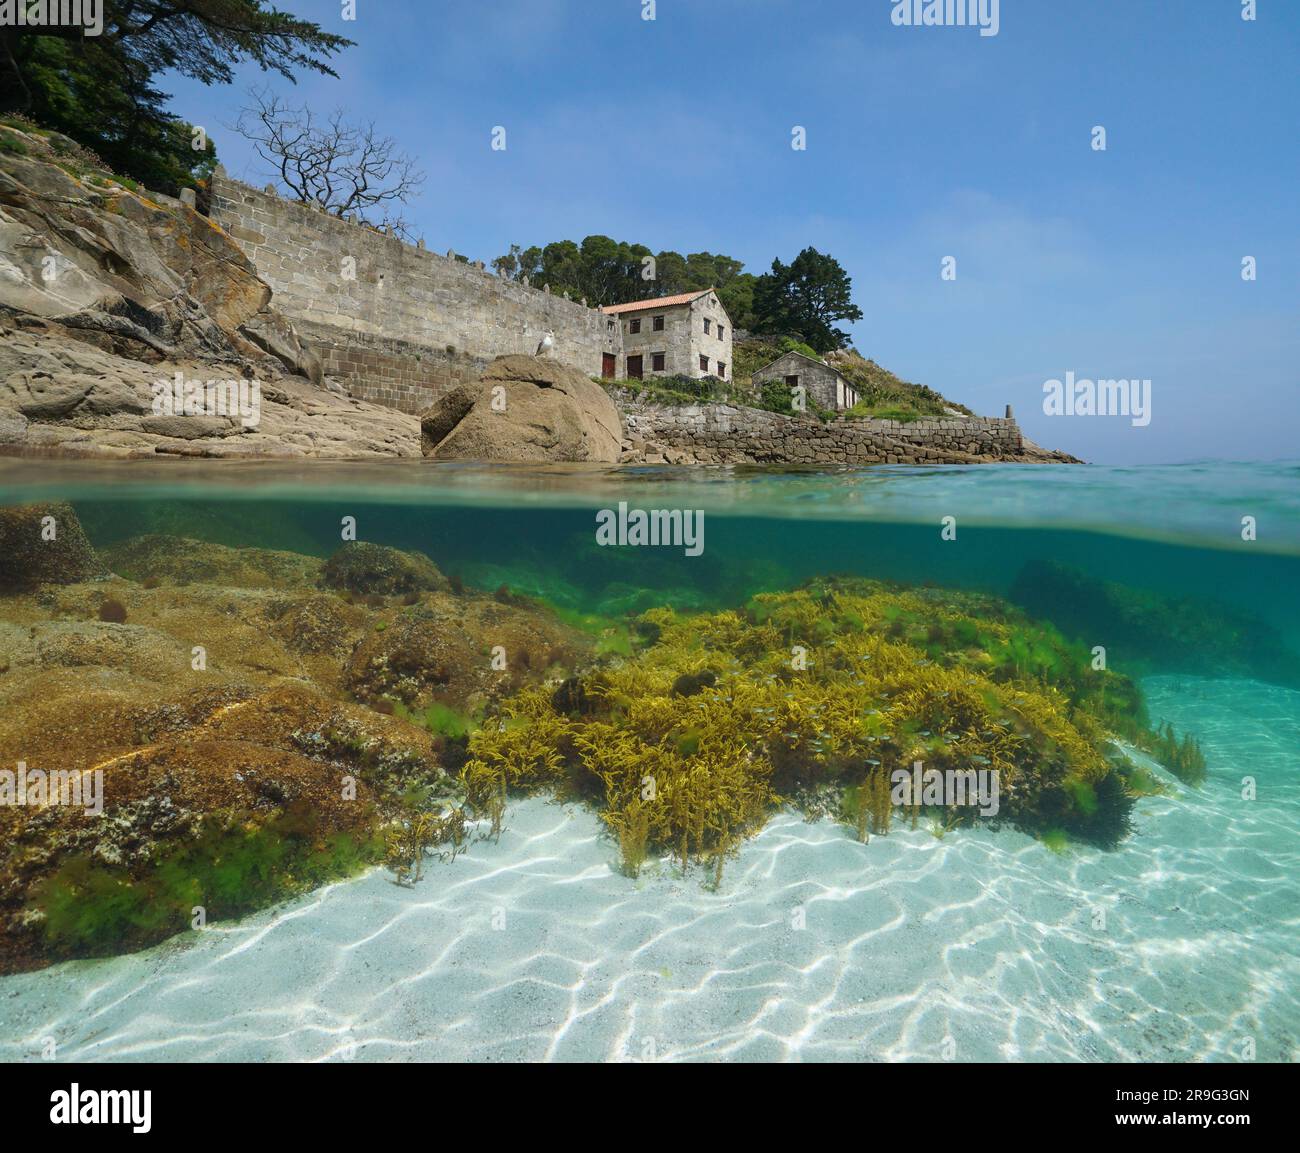 Spain, Galicia, old coastal house with stone wall and slipway on the shore of the Atlantic ocean, split view over and under water surface, Rias Baixas Stock Photo